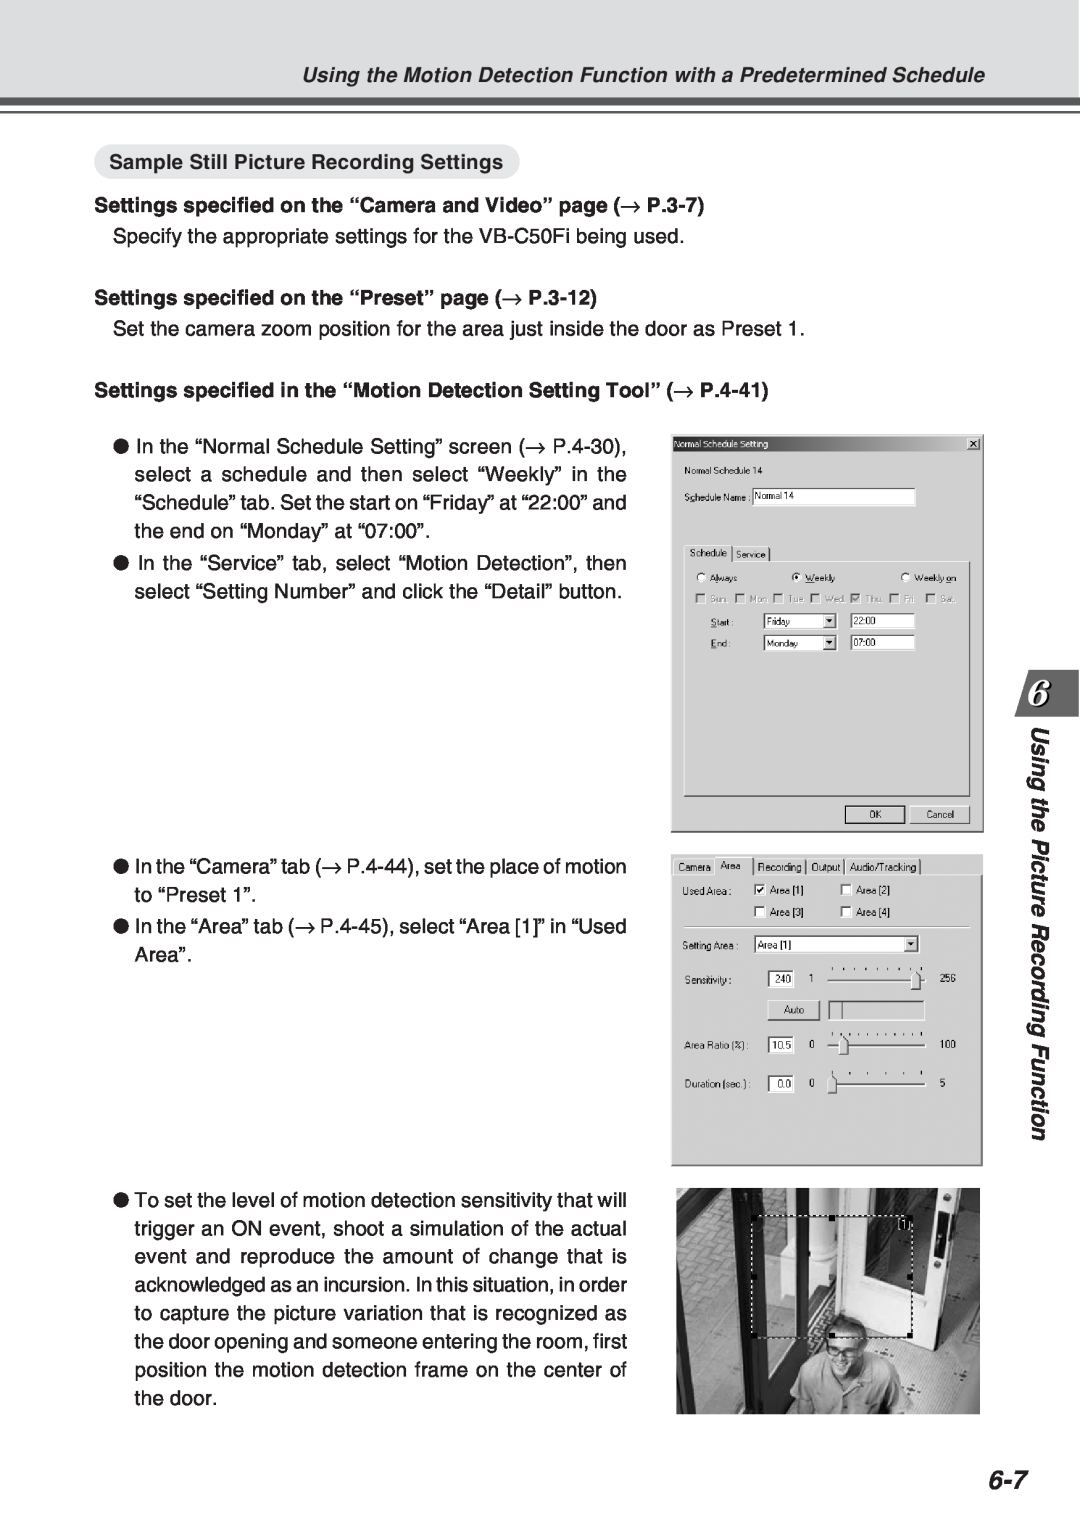 Canon Vb-C50fi user manual Using the Picture Recor ding Function, Sample Still Picture Recording Settings 